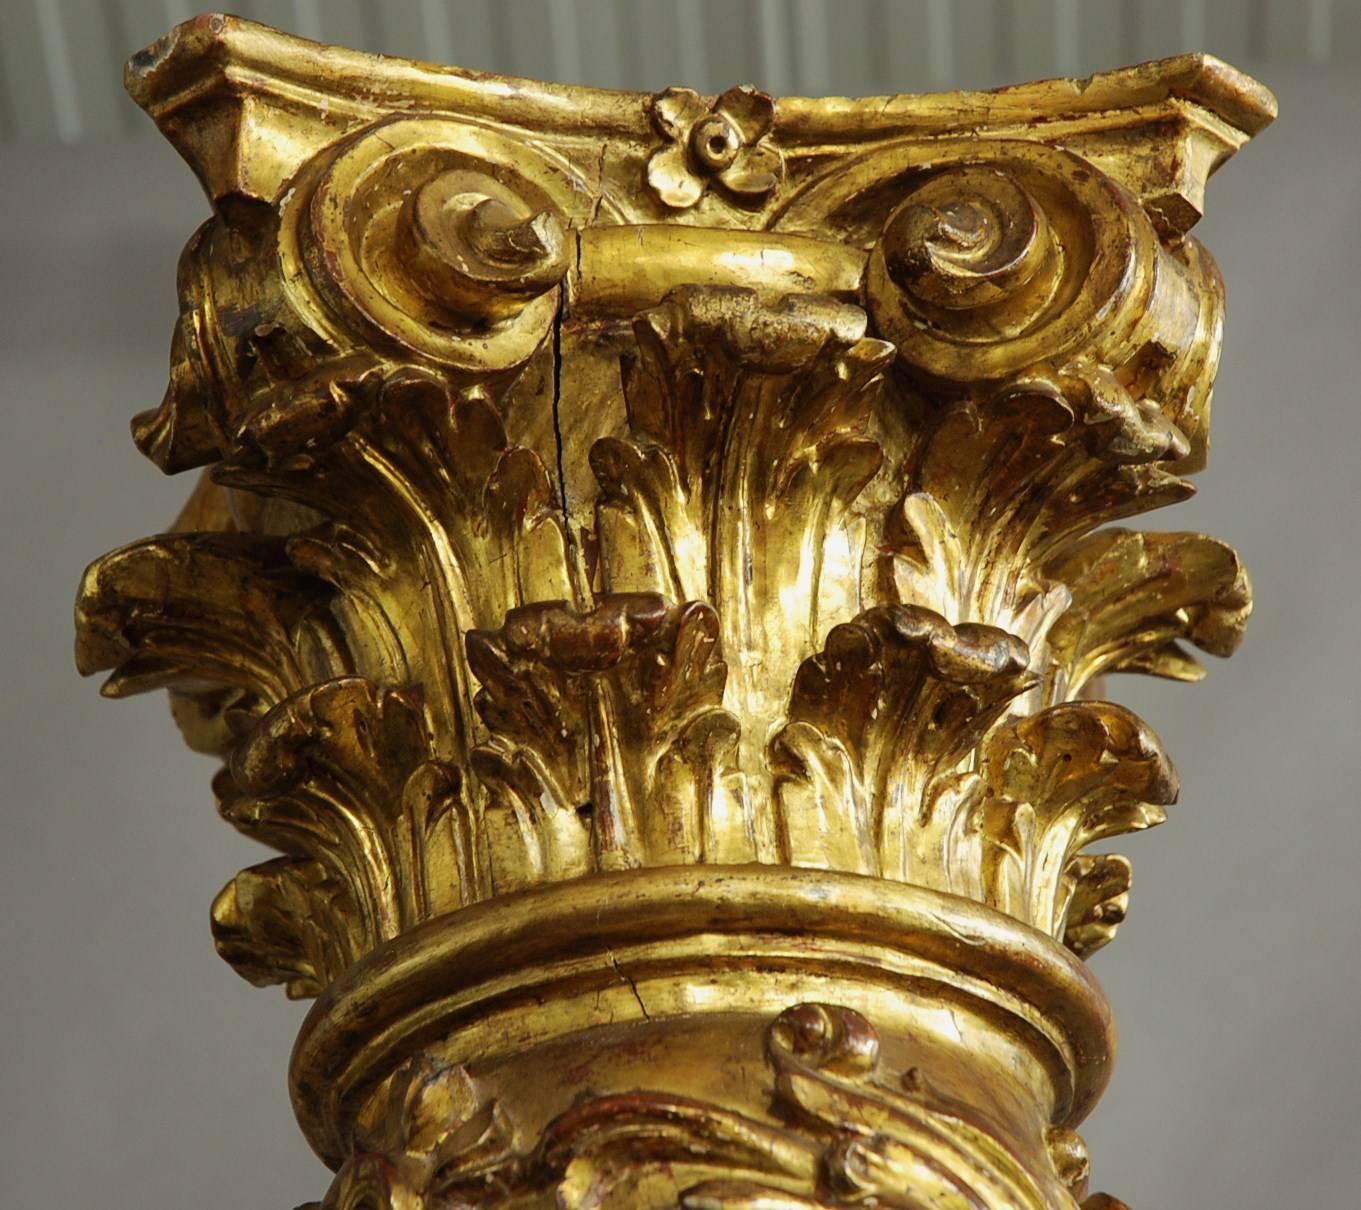 A highly decorative large pair of late 18th century Baroque style Solomonic carved gilt wood columns, possibly Spanish or Italian with original gilding.

This stunning pair of columns consist of Corinthian capitals to the top carved with scrolling